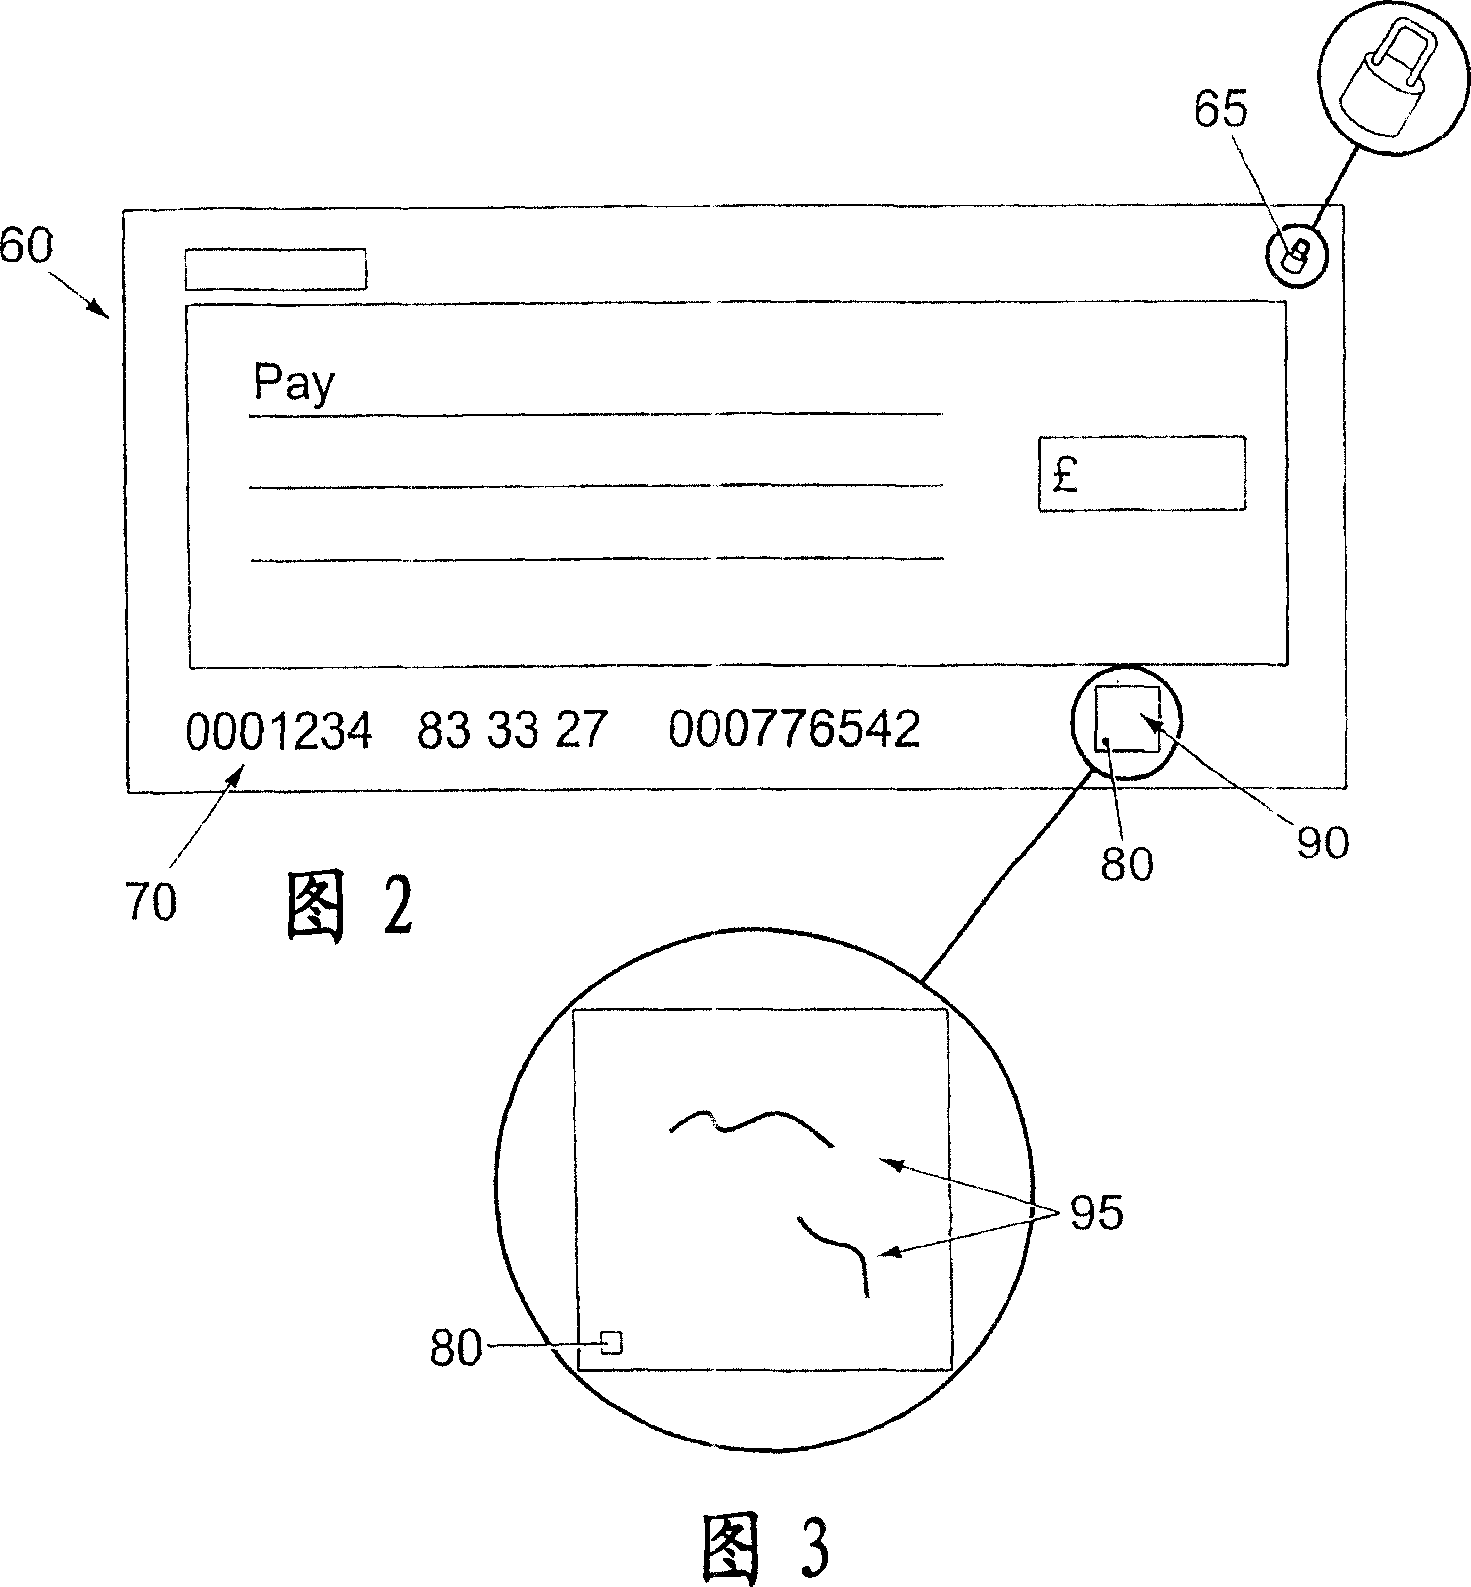 Apparatus and method for identifying an object having randomly distributed identification elements